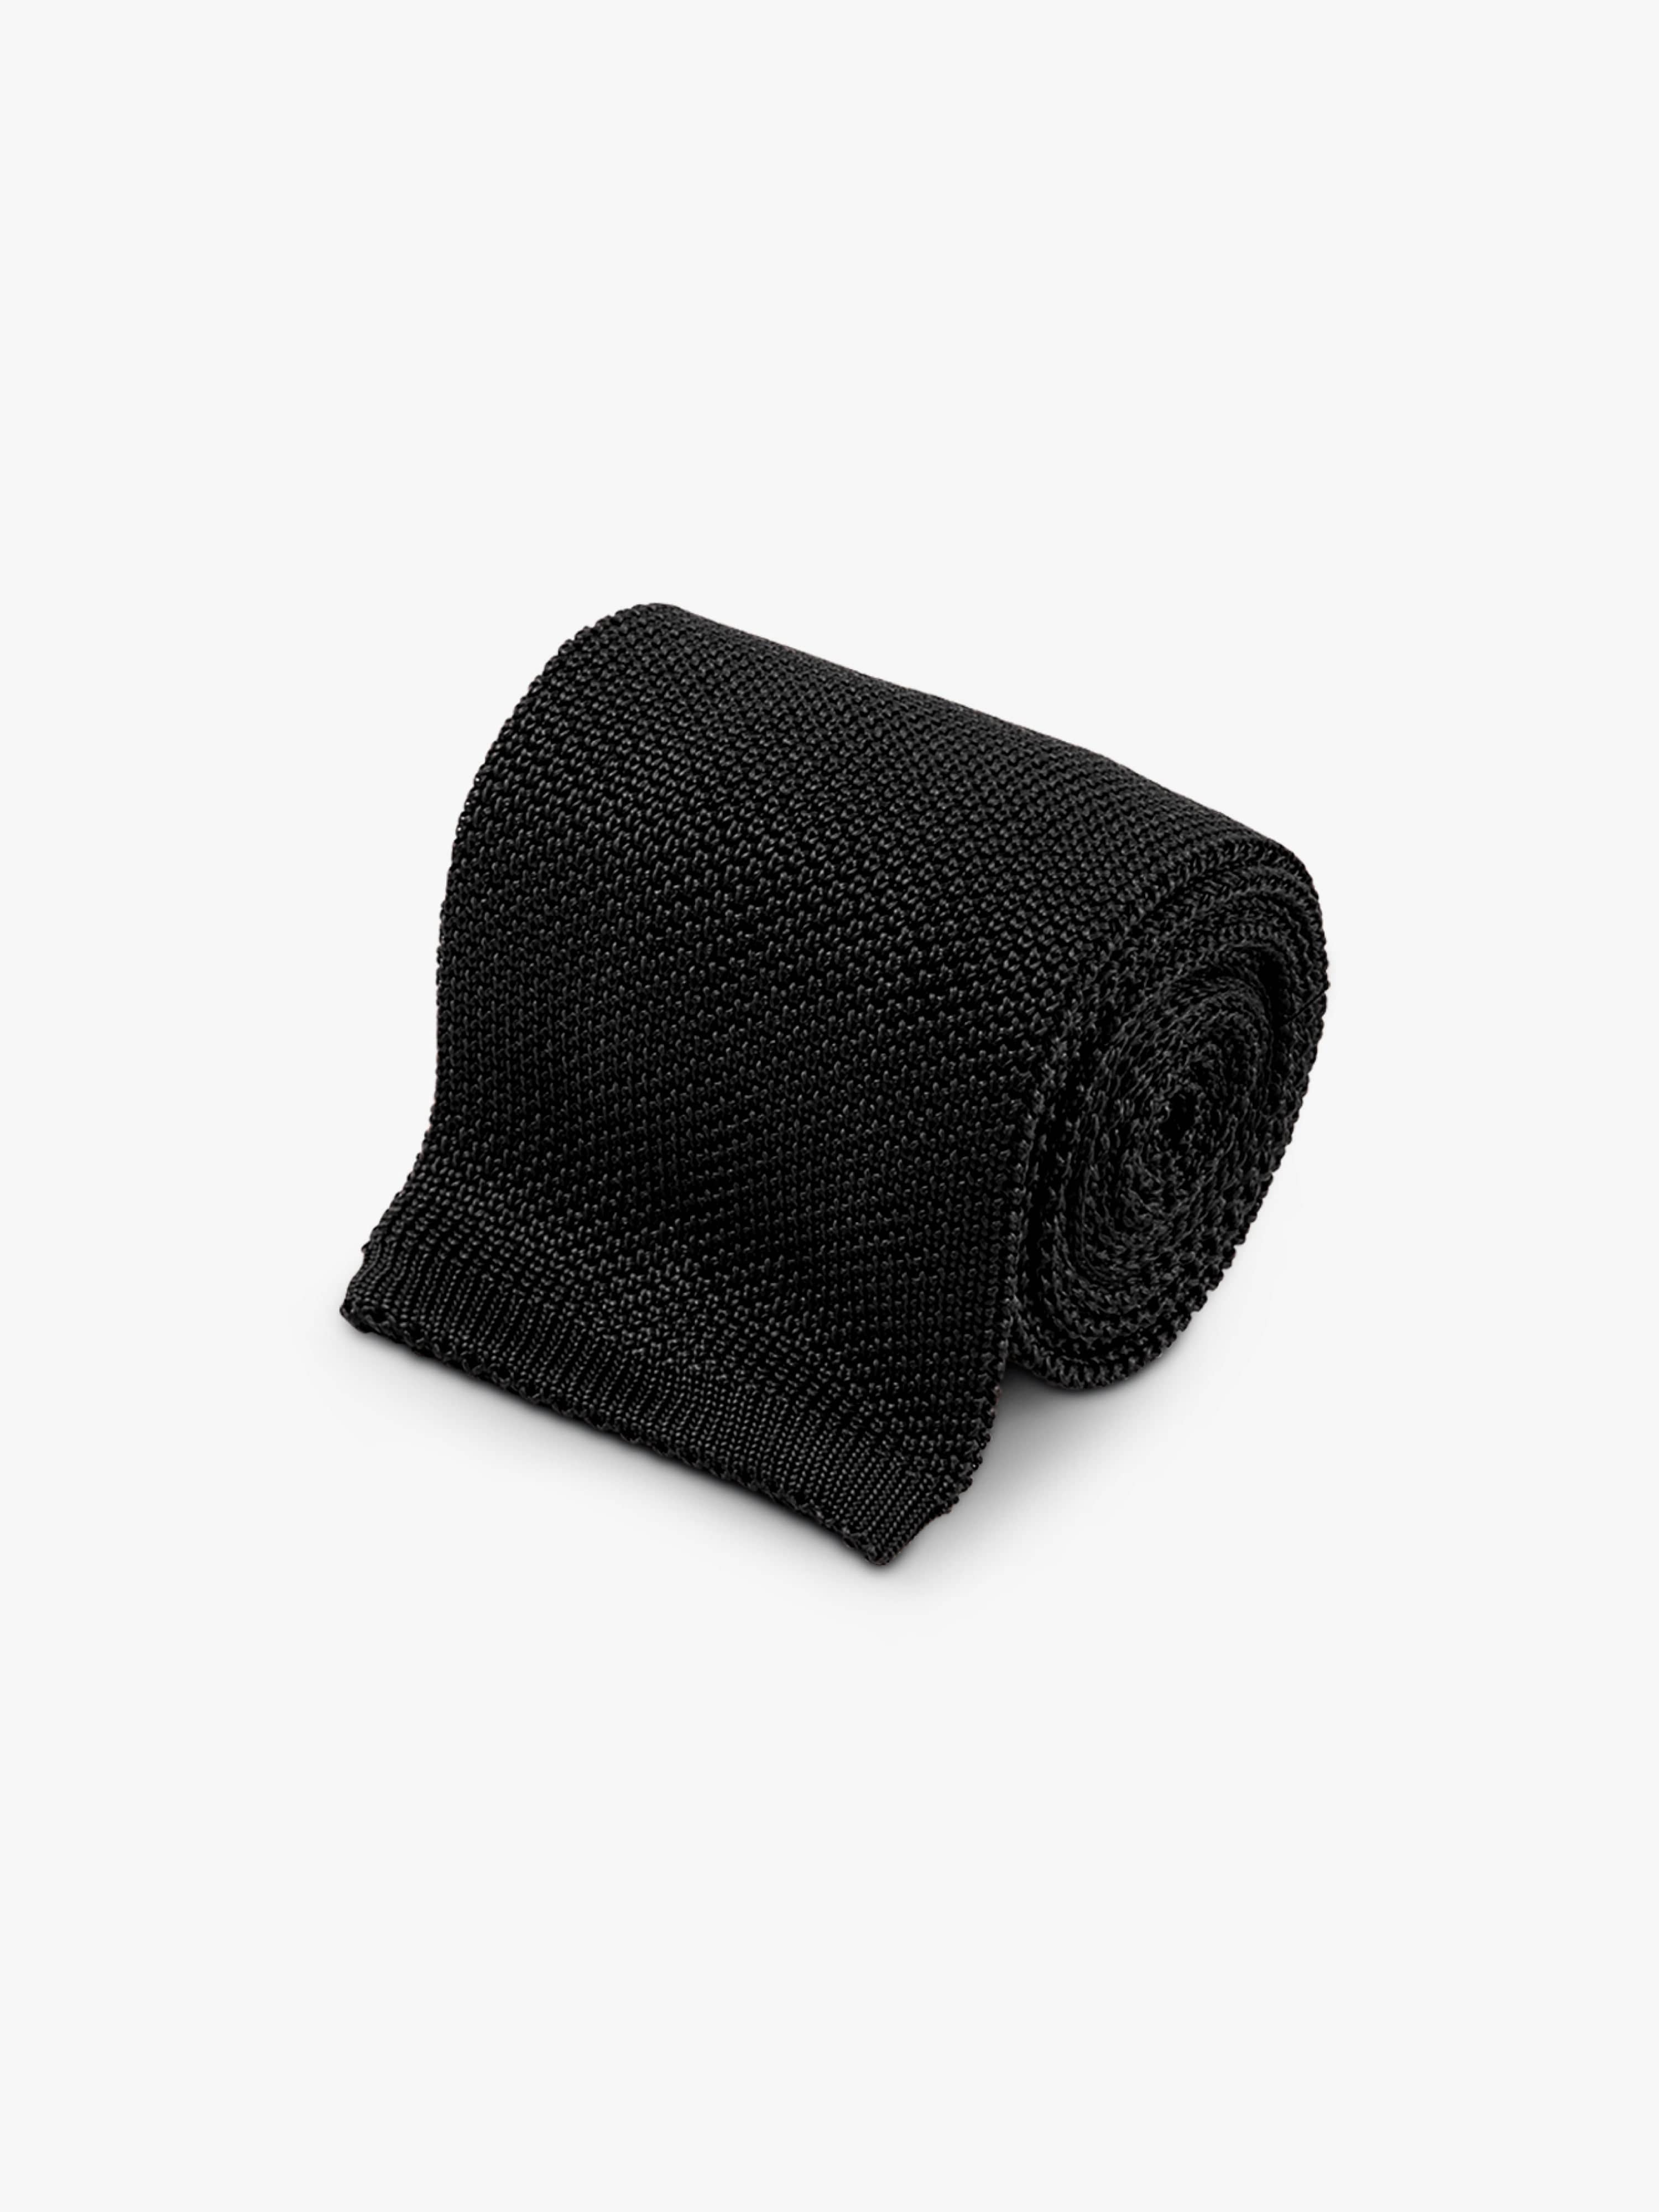 Black Knitted Tie - Grand Le Mar